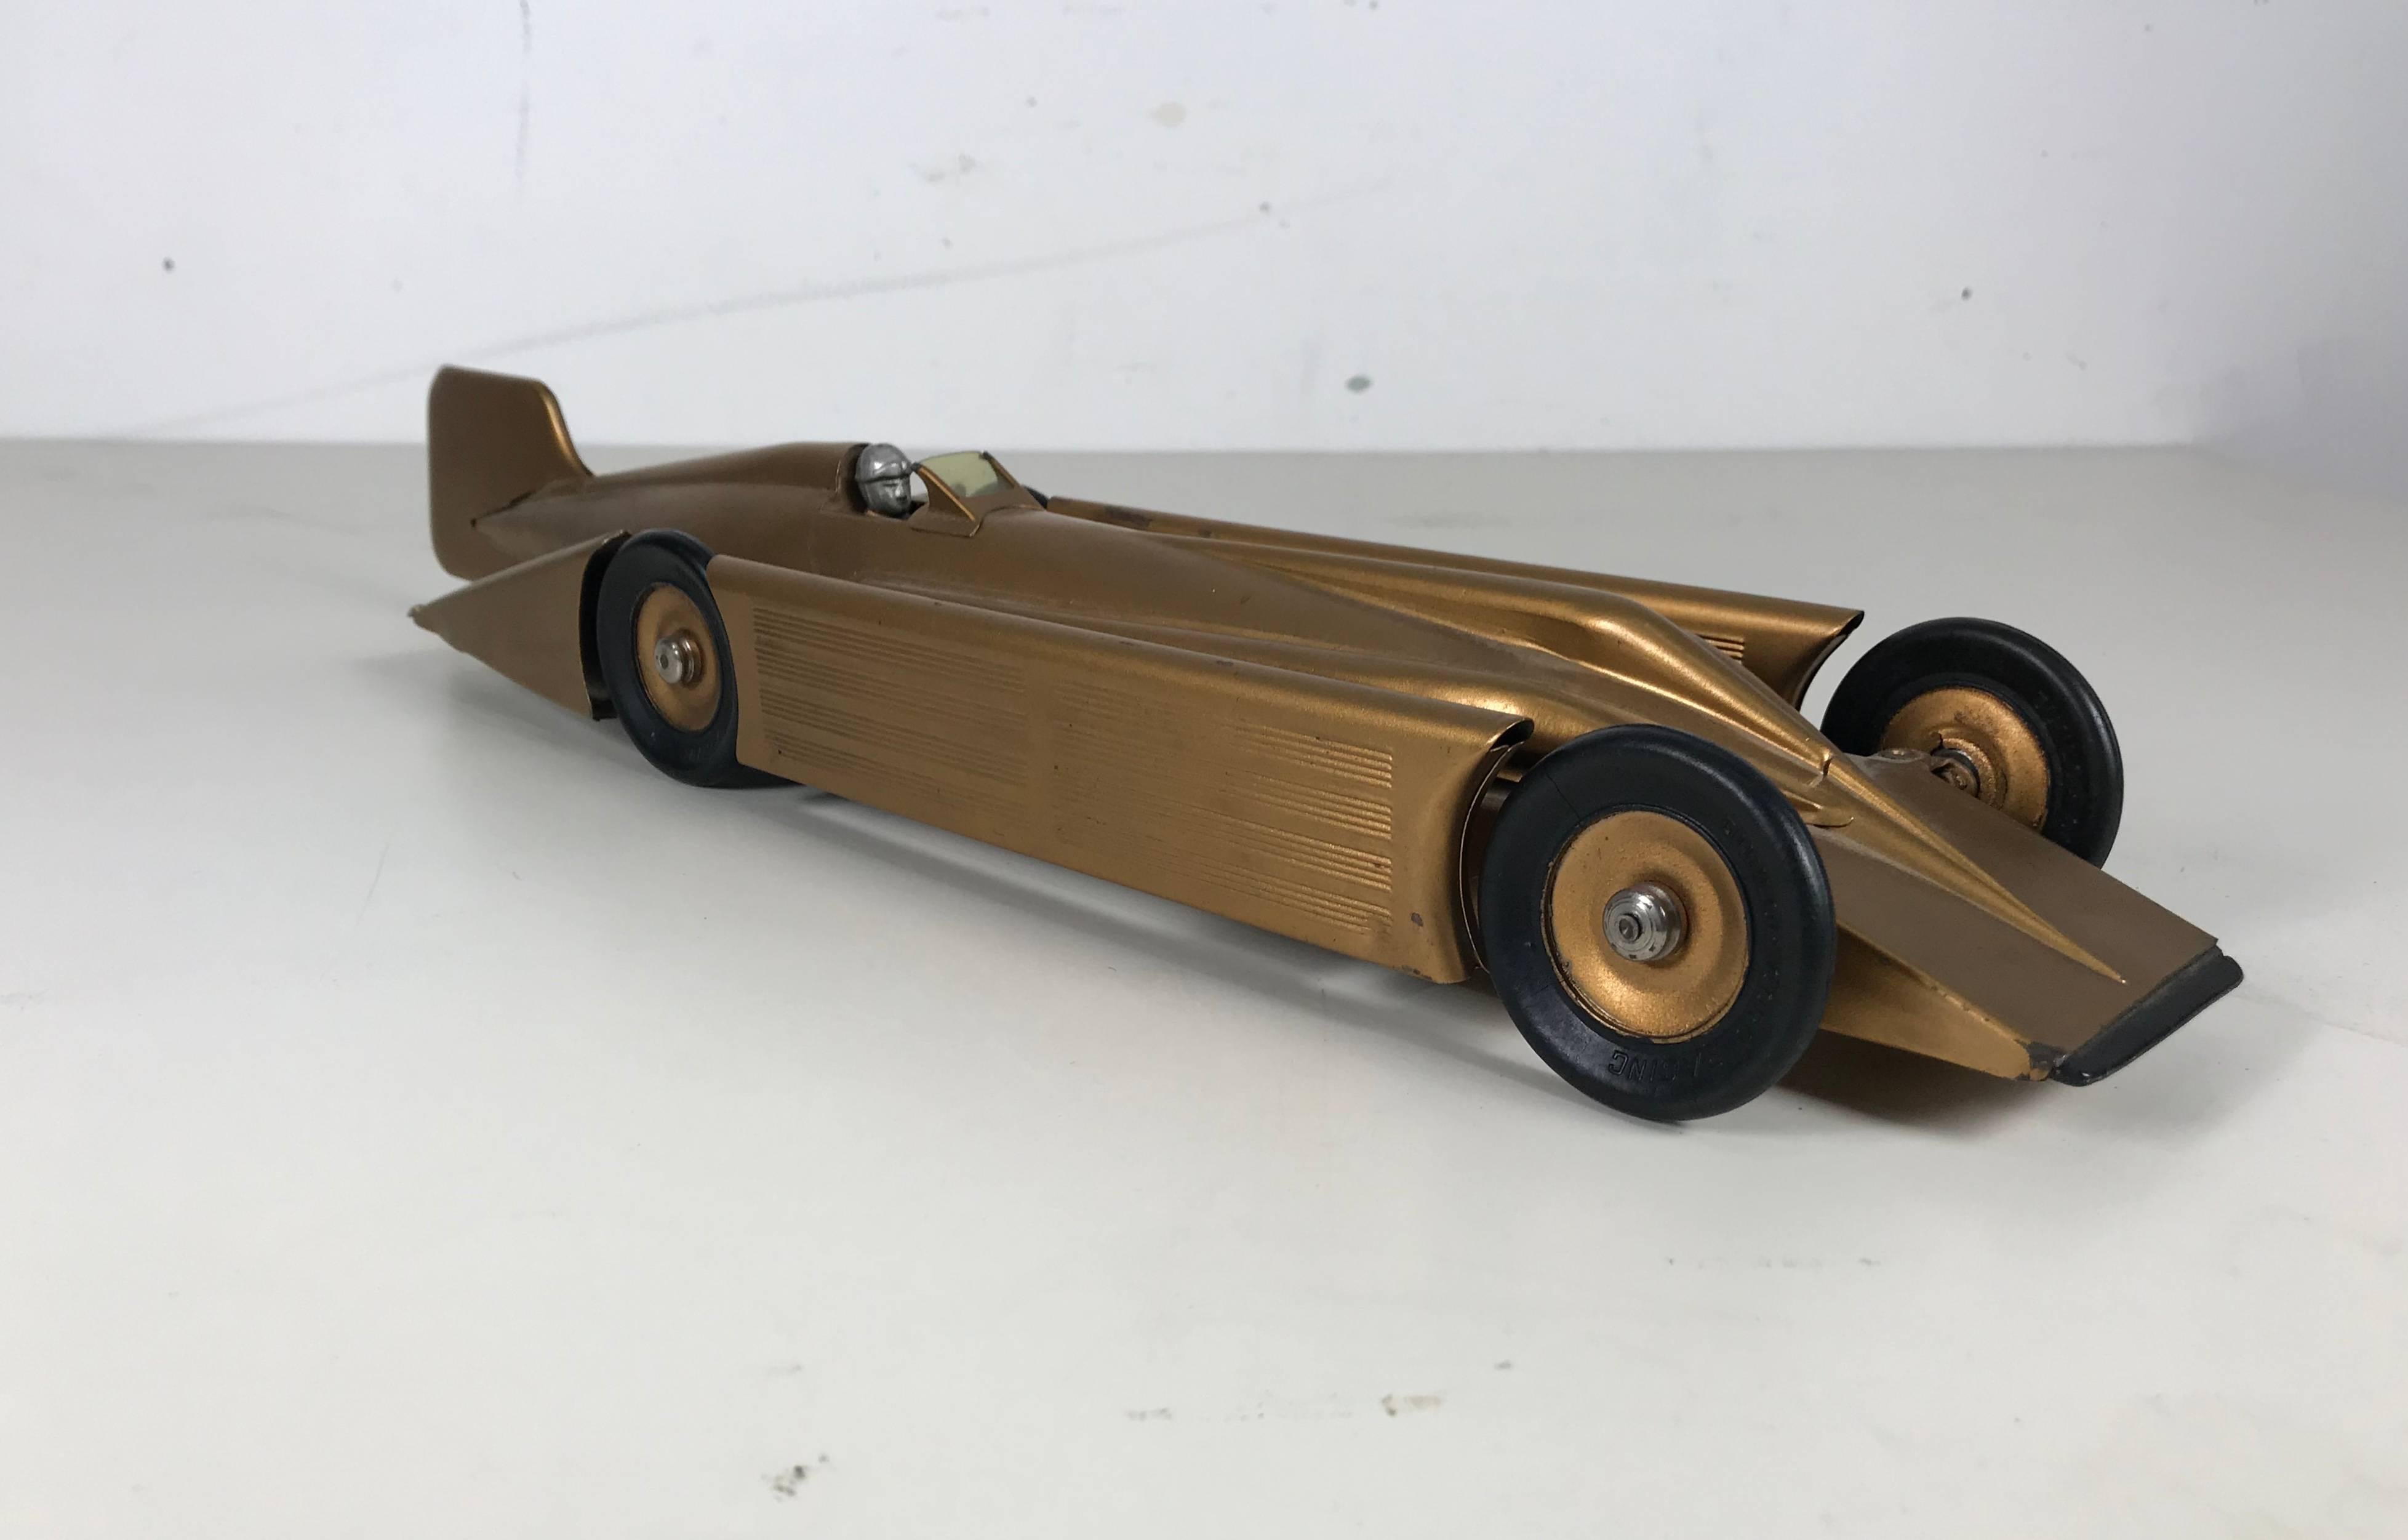 Super stylized futuristic metal car. Excellent original condition. Wind up mechanism working. Retains original decal, driver and windsheld. Amazing finish, paint, hardly used.

Kingsbury Toys

Kingsbury, the Wilkins Toy Company, manufacturer of